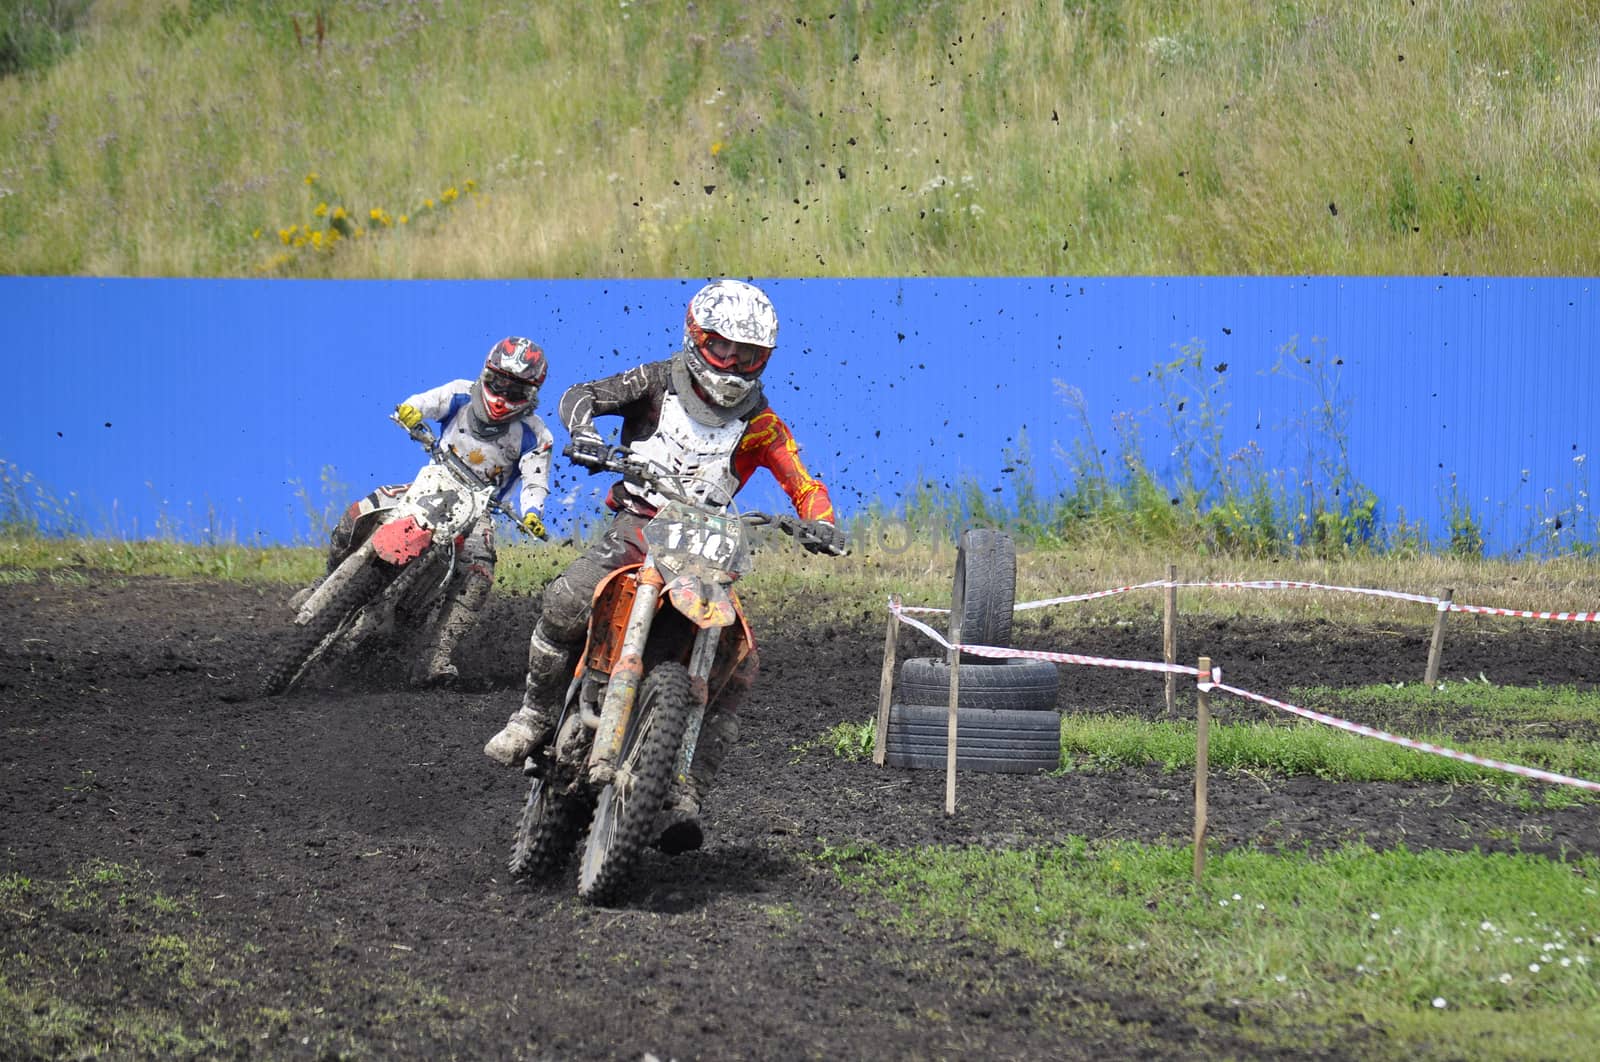 Racers on motorcycles participate in cross-country race competit by veronka72